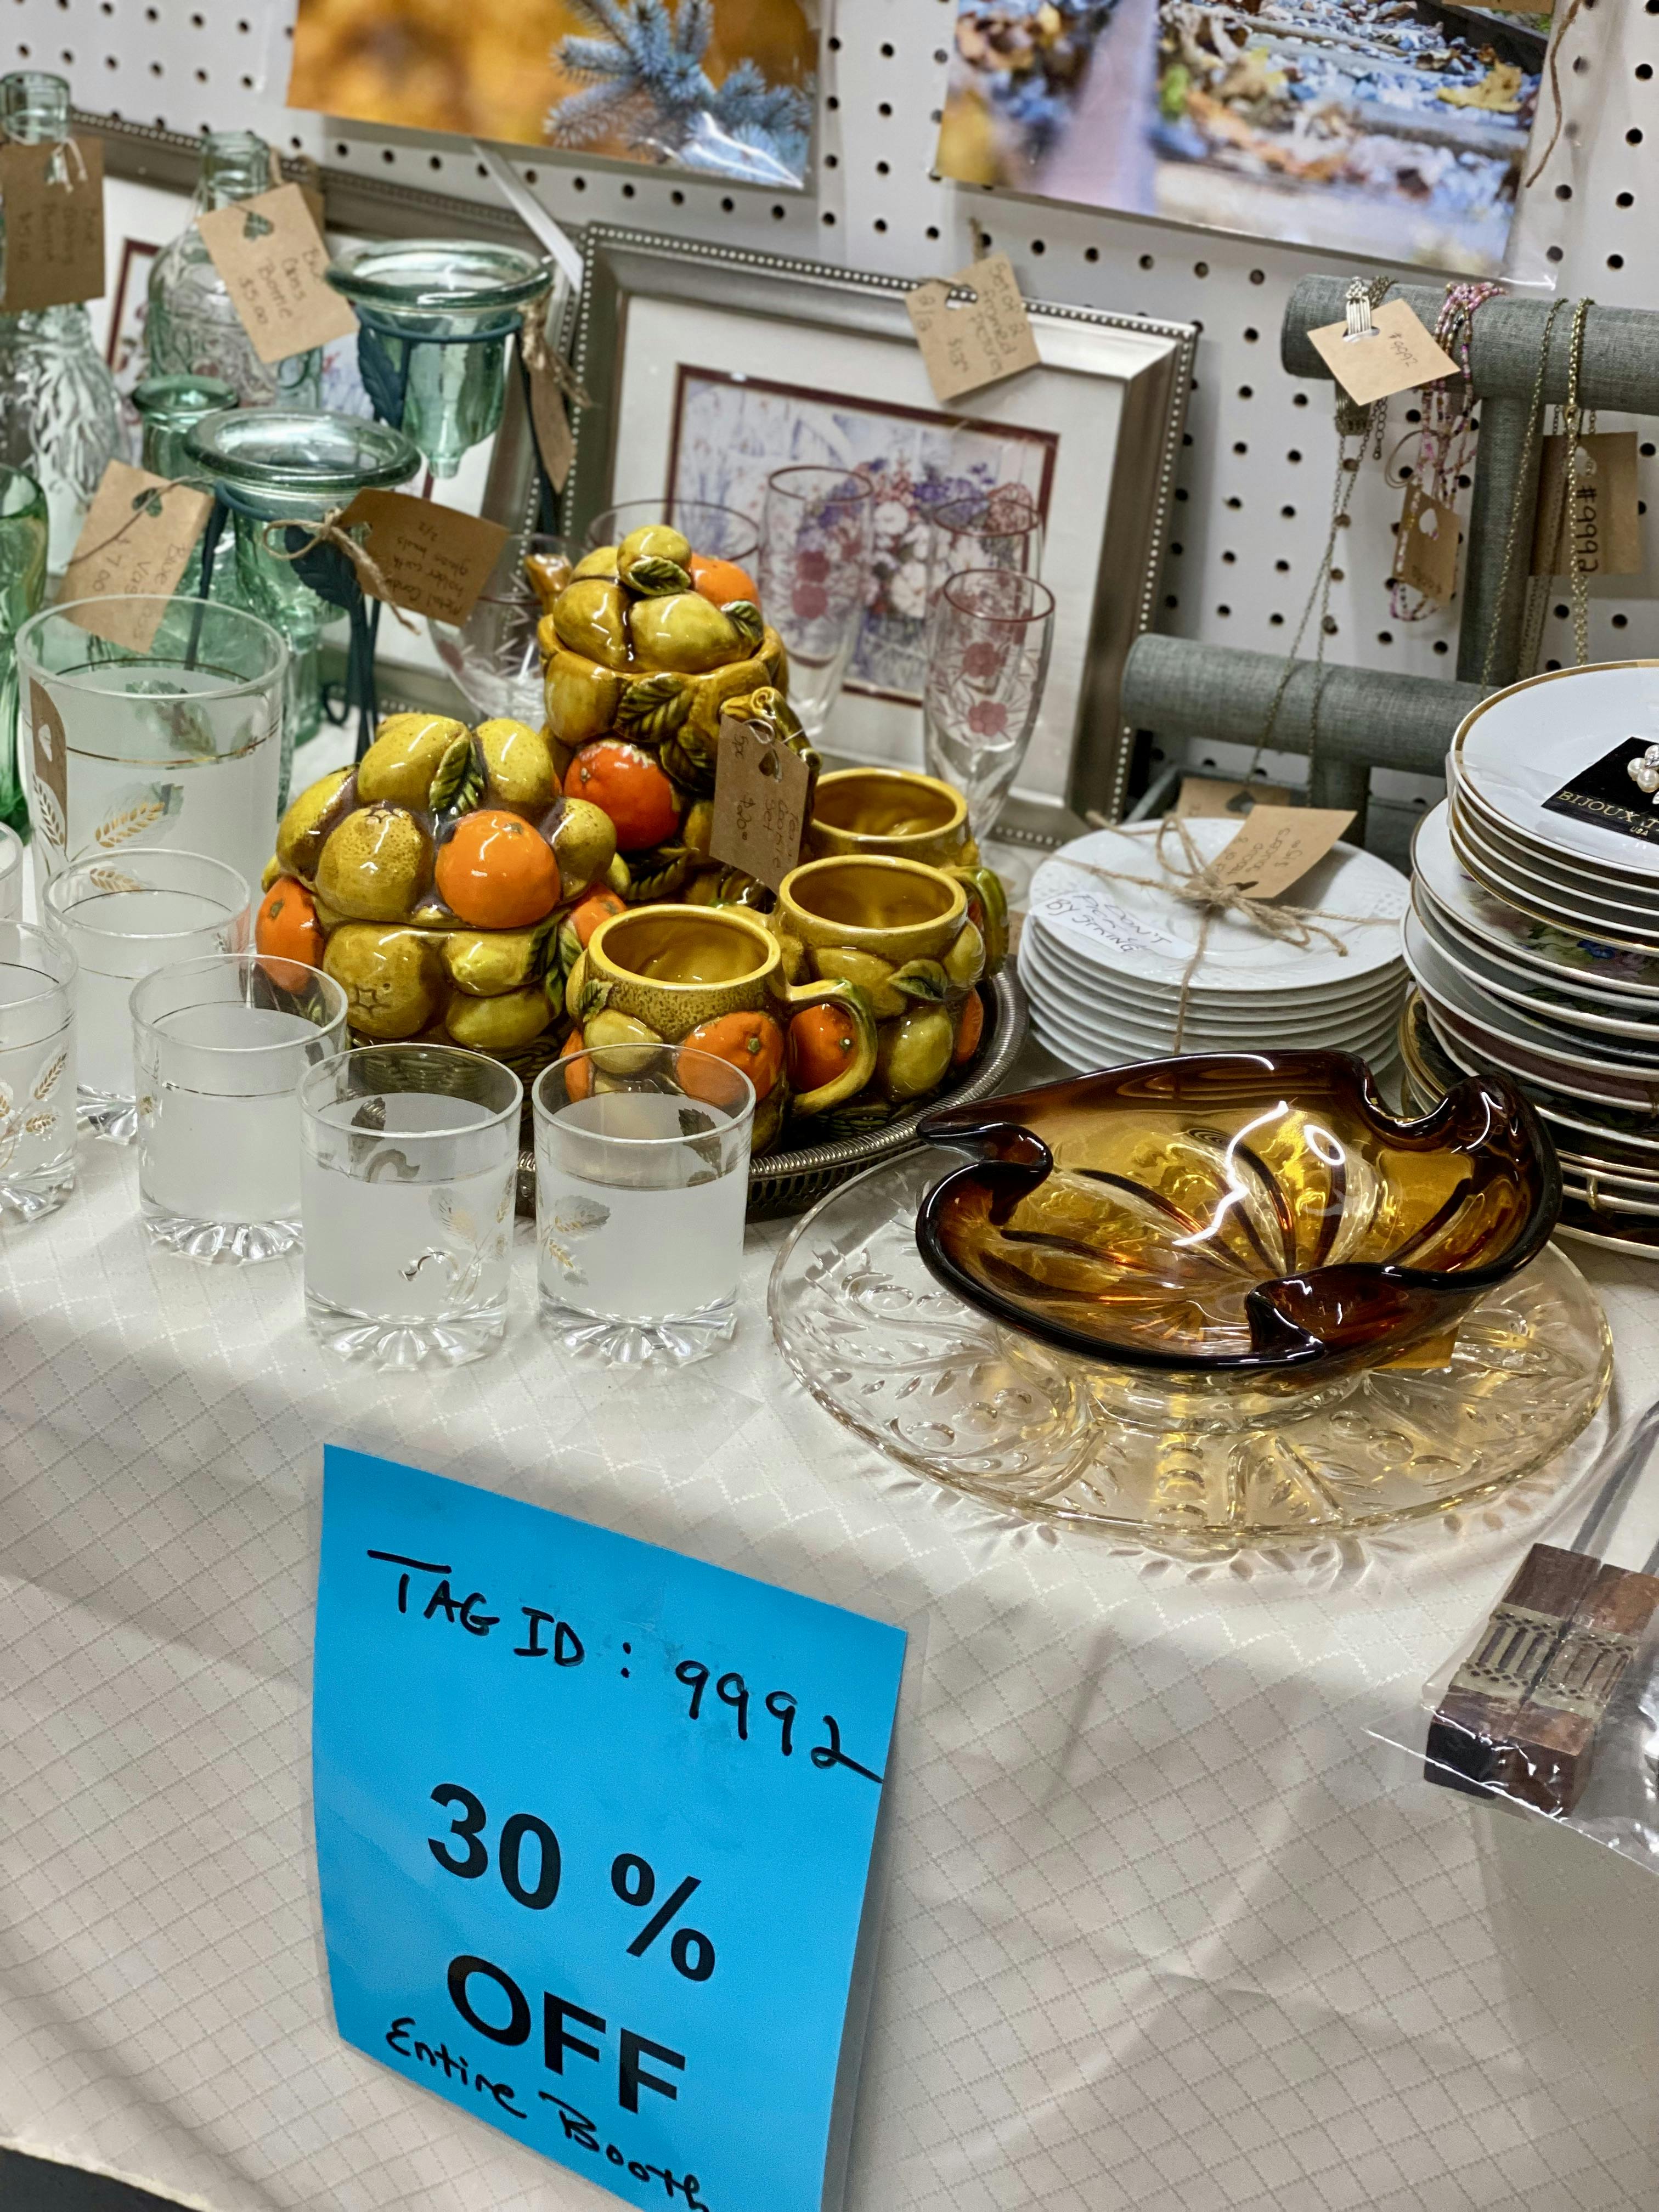 Booth AD6 has lots of classic vintage and handmade items that must go! 